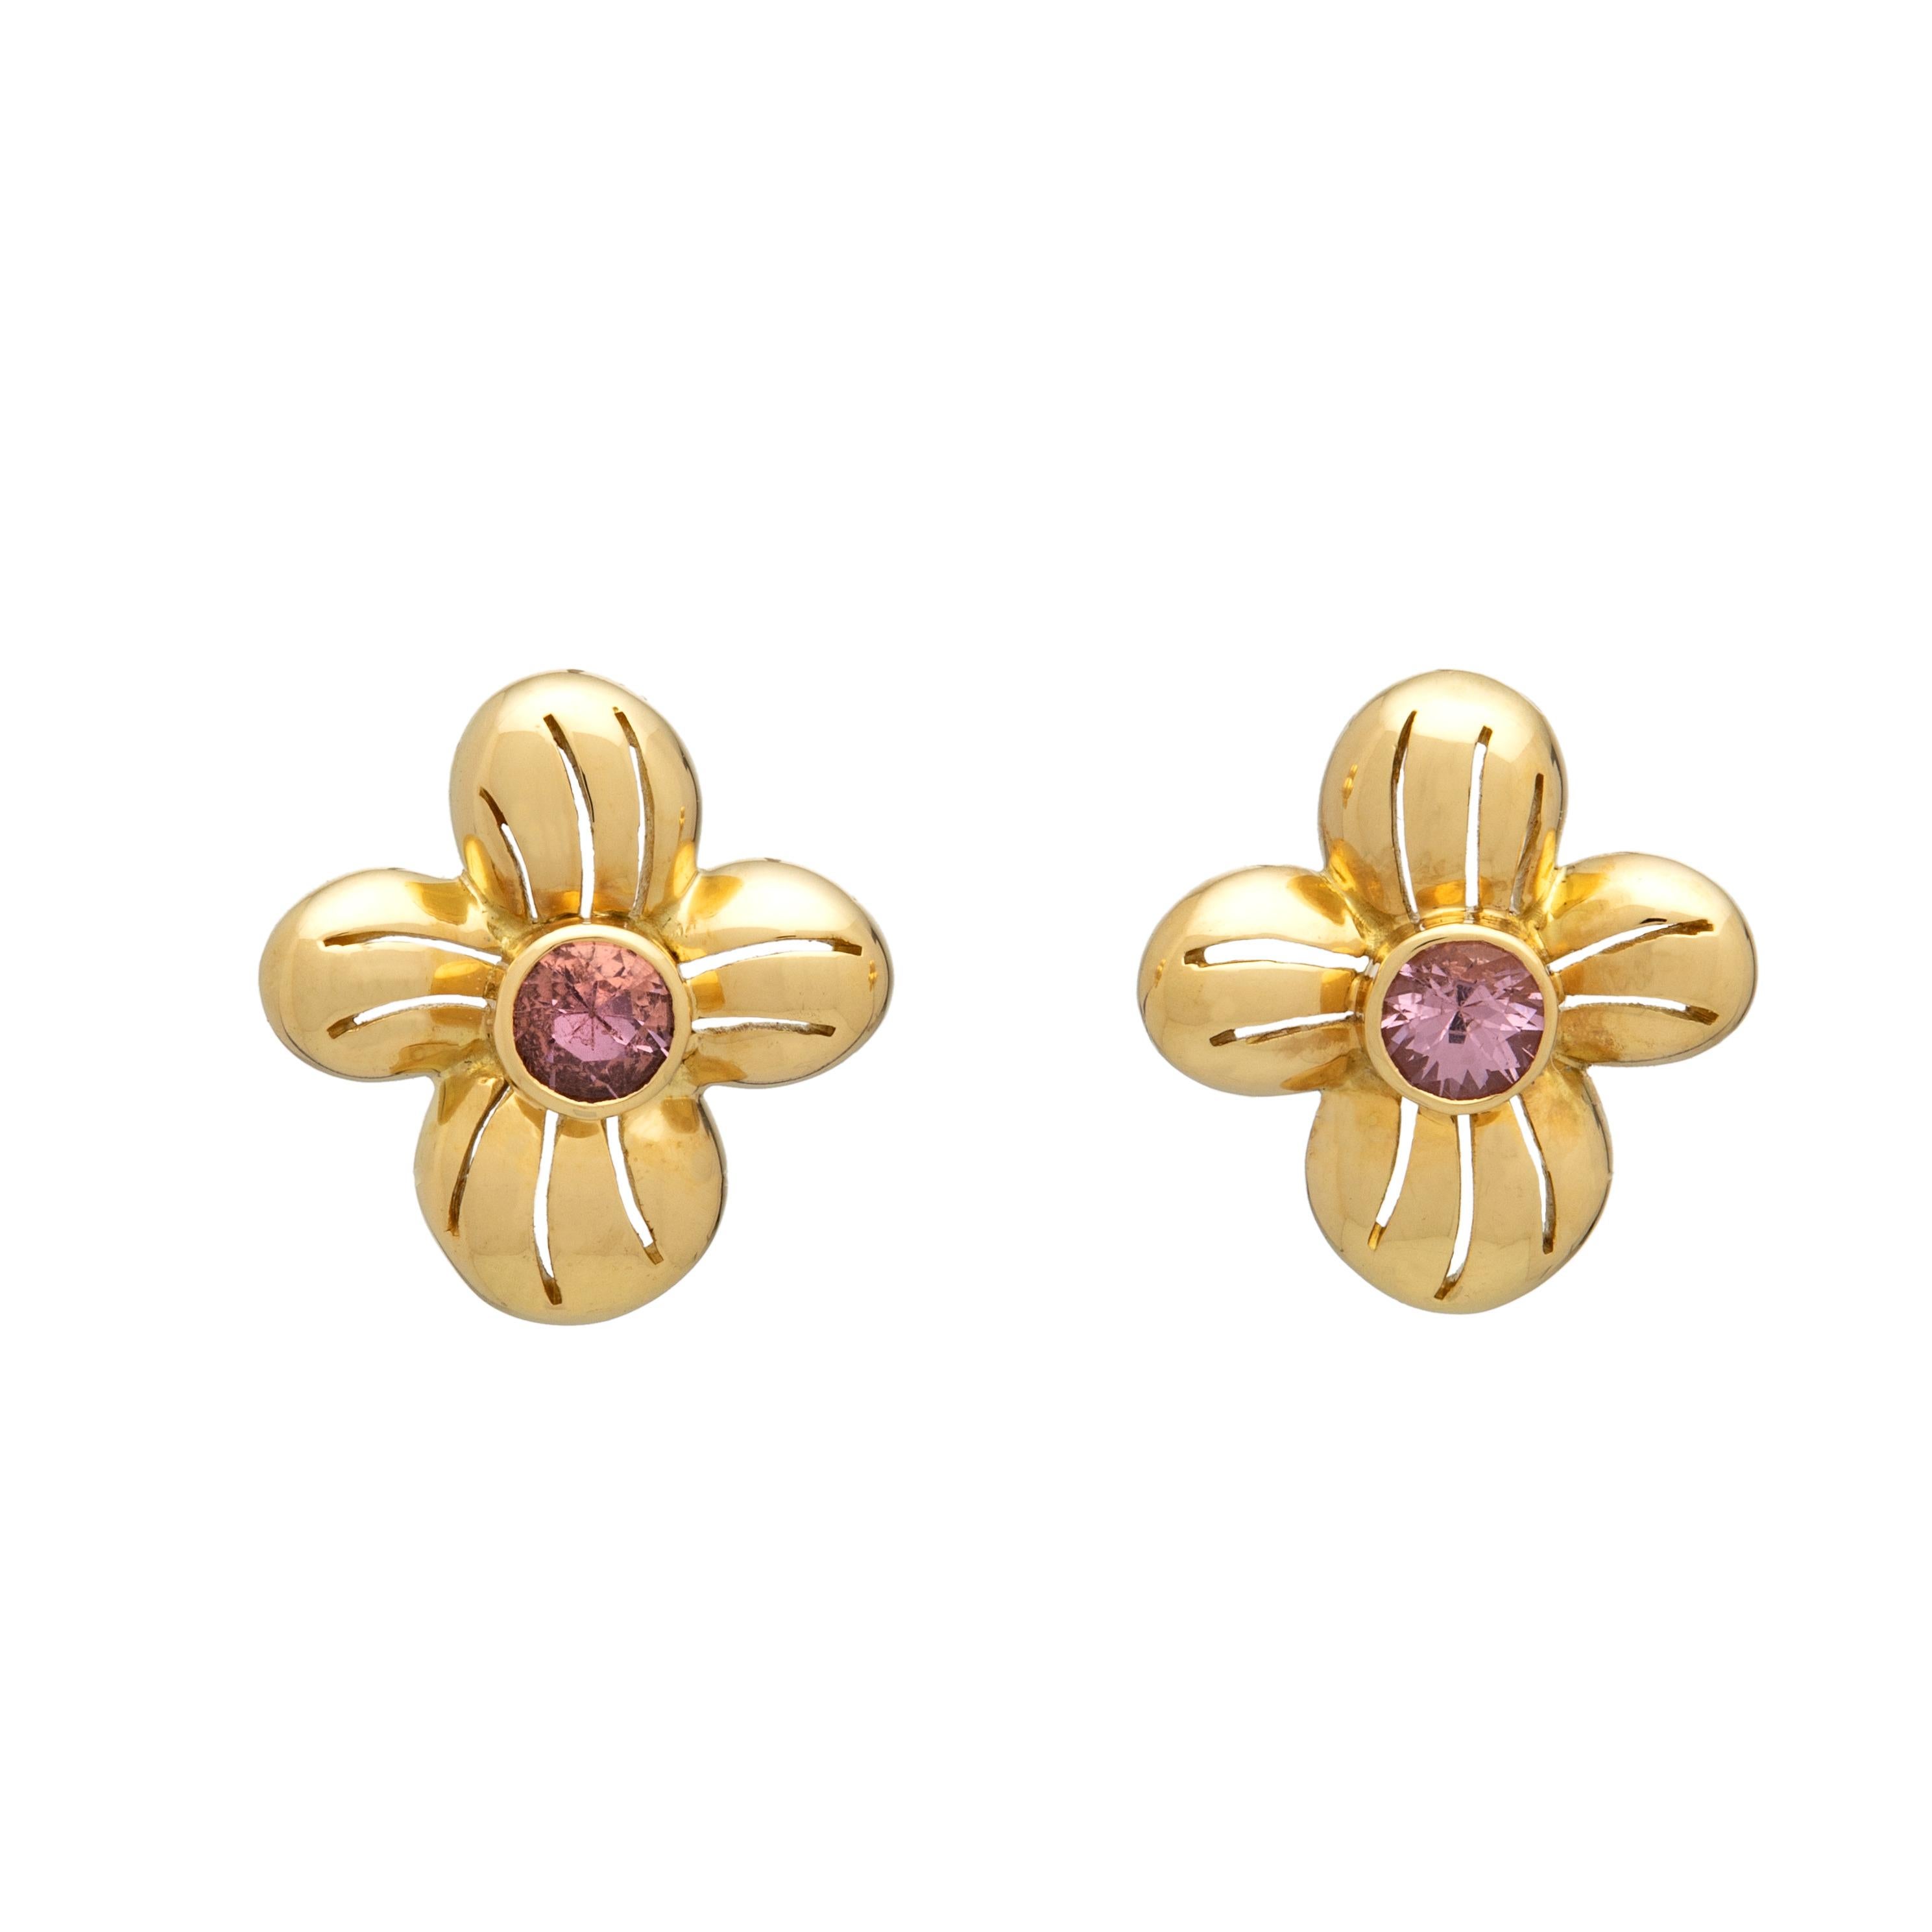 Contemporary 18k Gold Pierced Flower Earrings with Pink Spinels, by Gloria Bass For Sale